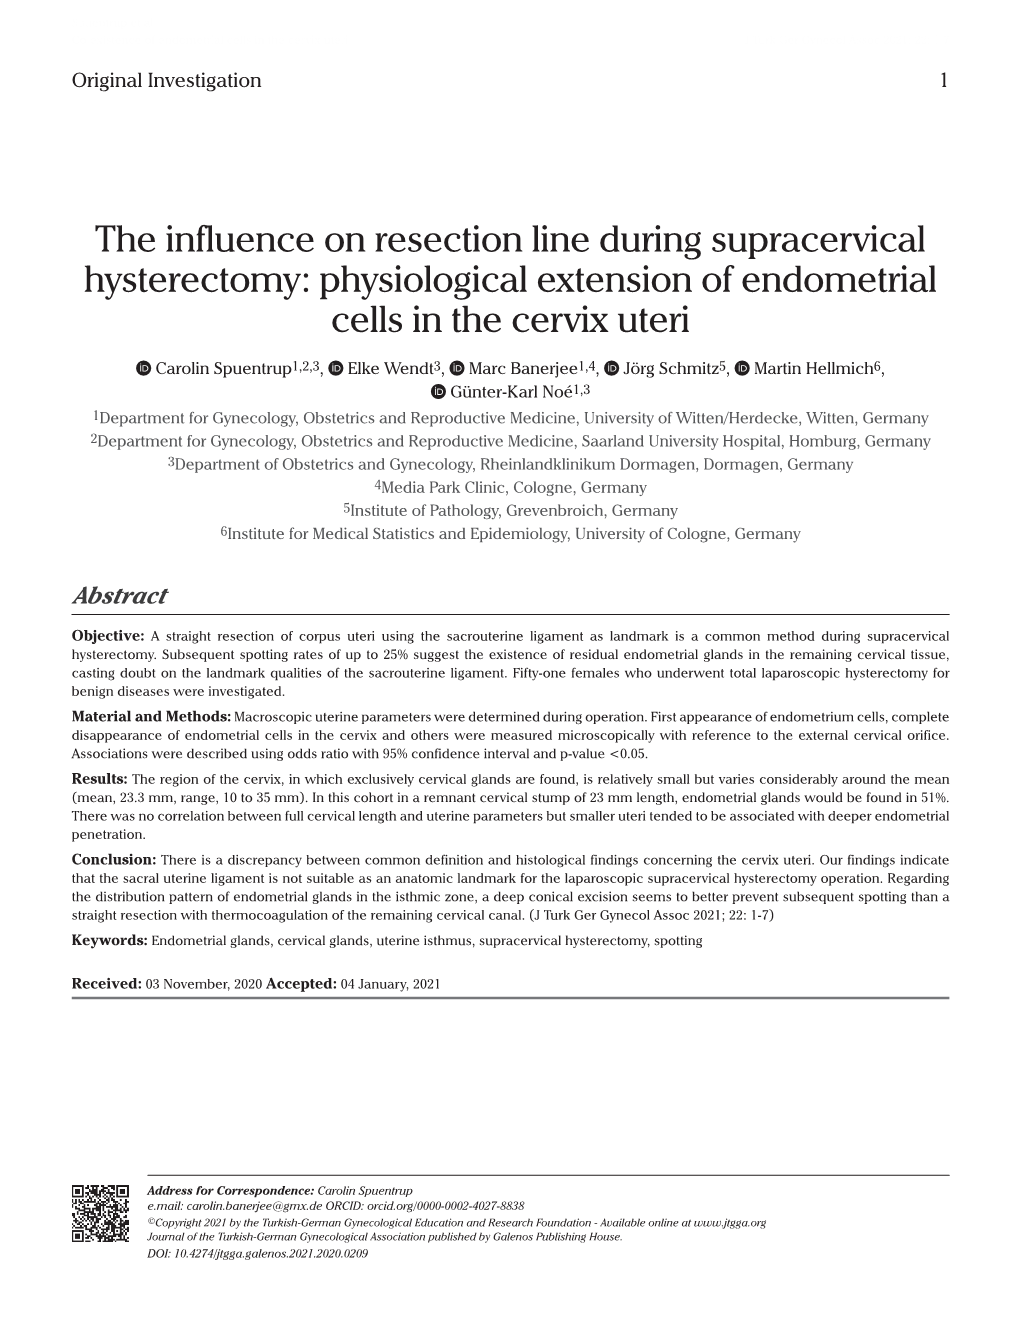 The Influence on Resection Line During Supracervical Hysterectomy: Physiological Extension of Endometrial Cells in the Cervix Uteri